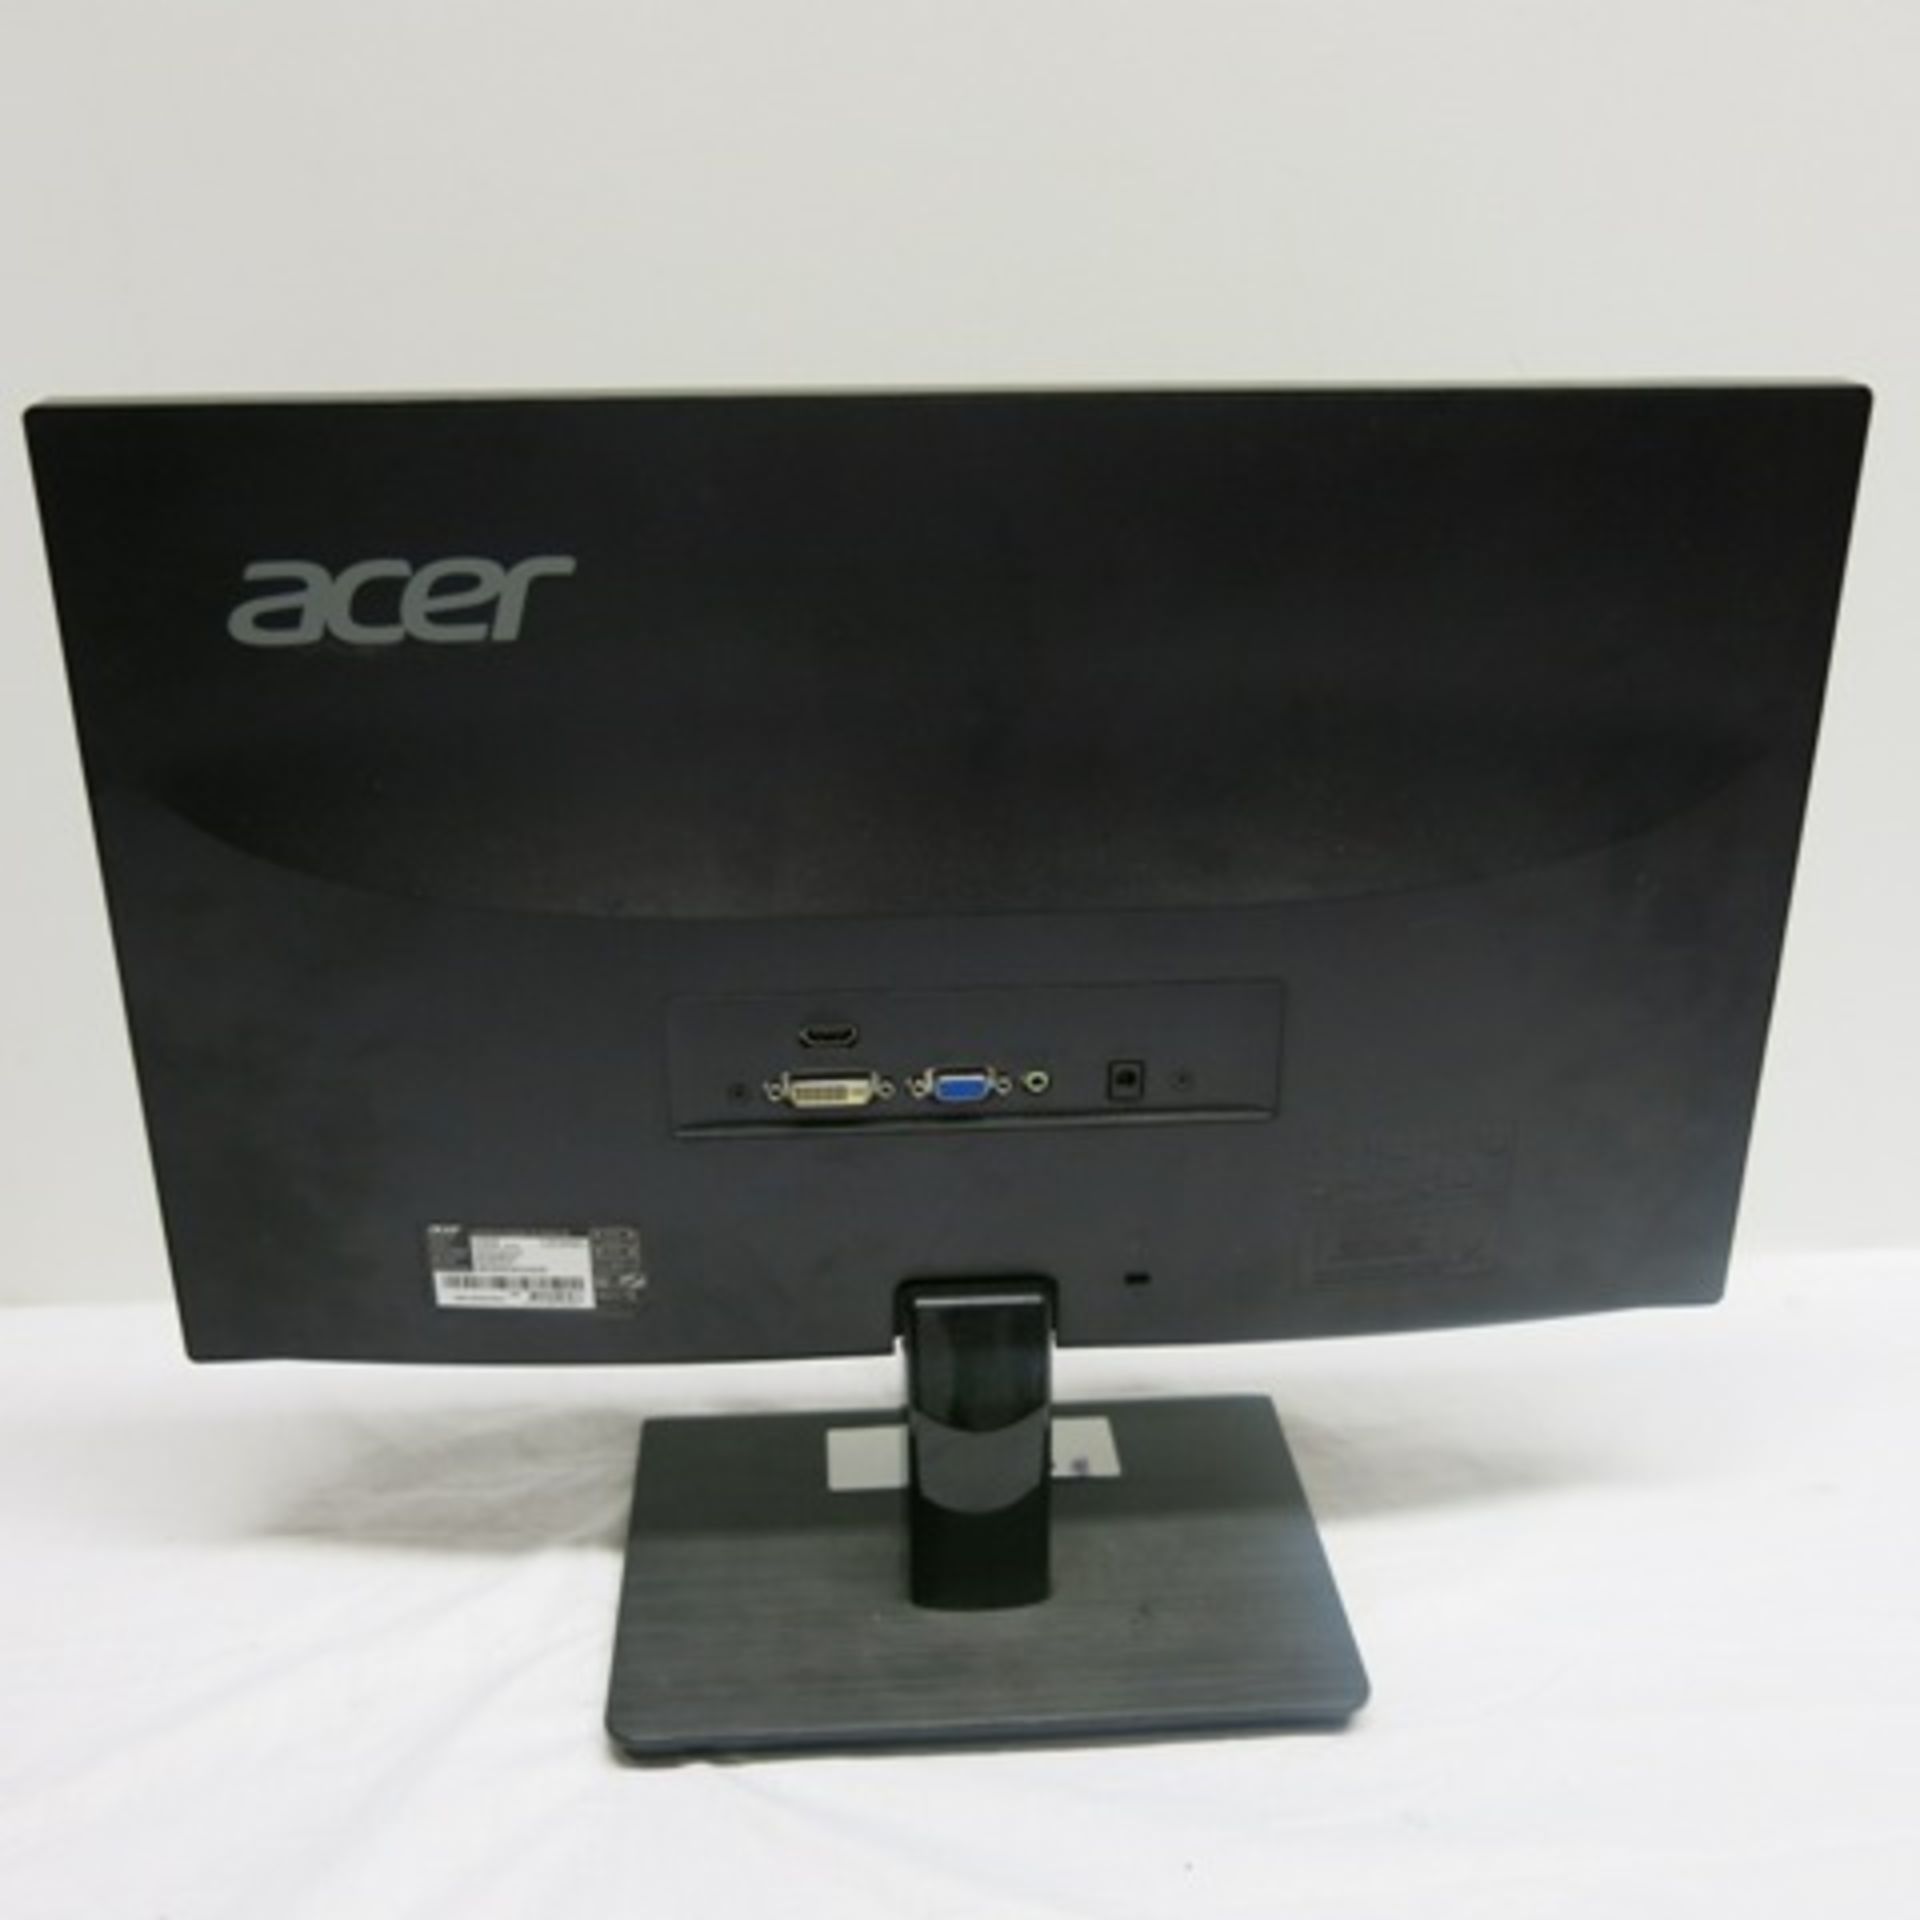 Acer 22" LCD Monitor, Model H226HQL with Power Supply - Image 2 of 2